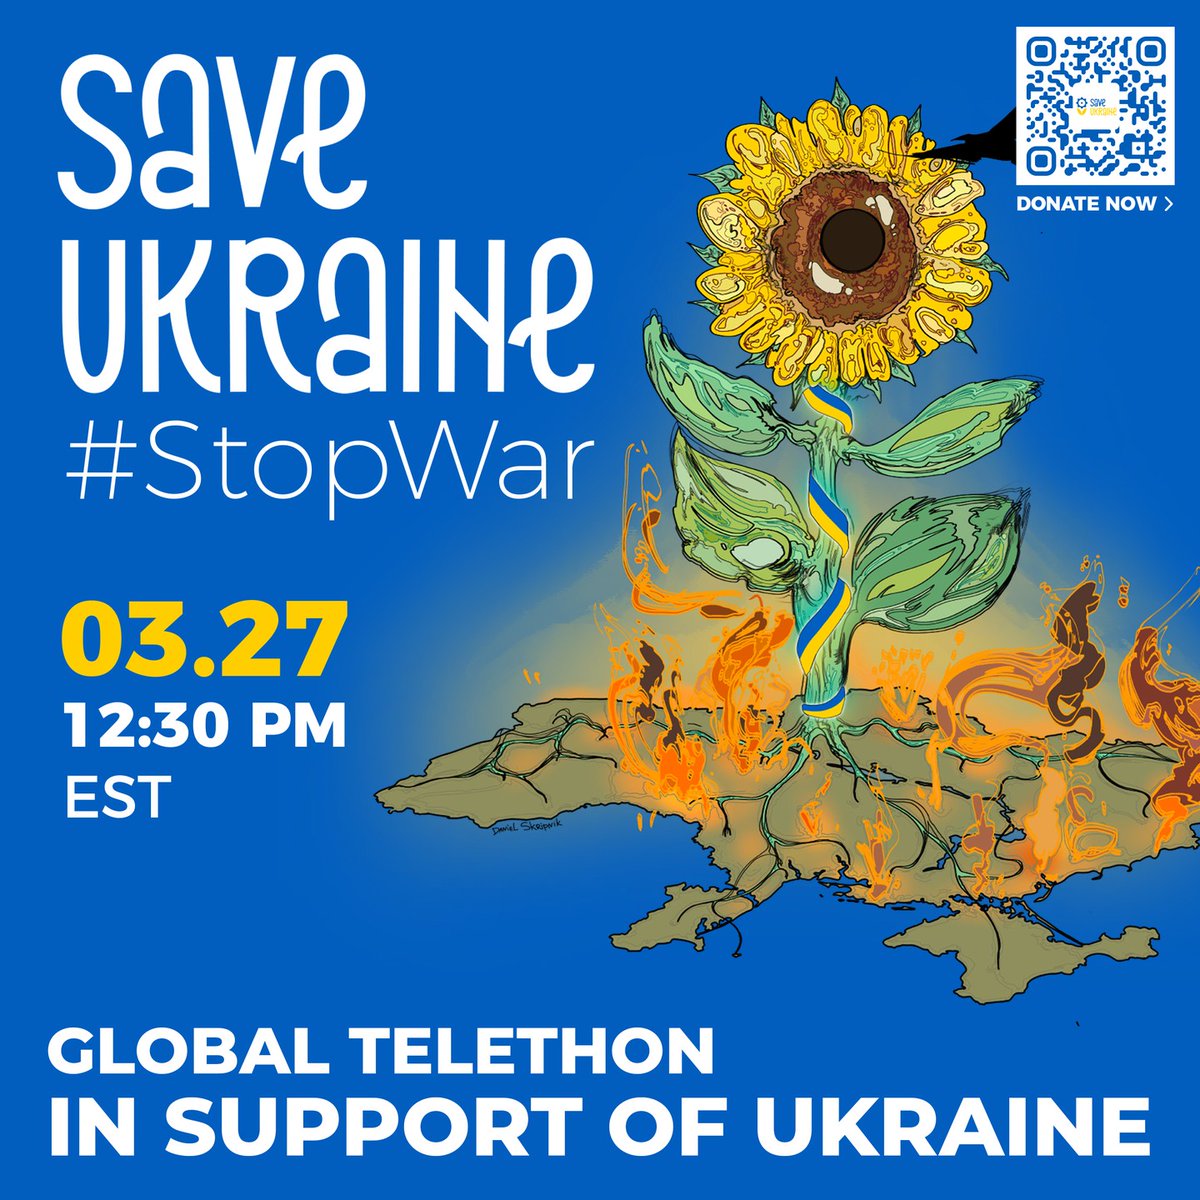 On March 27 at 12:30 PM, join millions worldwide for a two-hour Save Ukraine #StopWar telethon event to raise funds directly for the Ukrainian people.  Click the link in bio or scan the QR code to donate before, during or after the event. 🇺🇦#StopWarInUkraine #StandWithUkraine